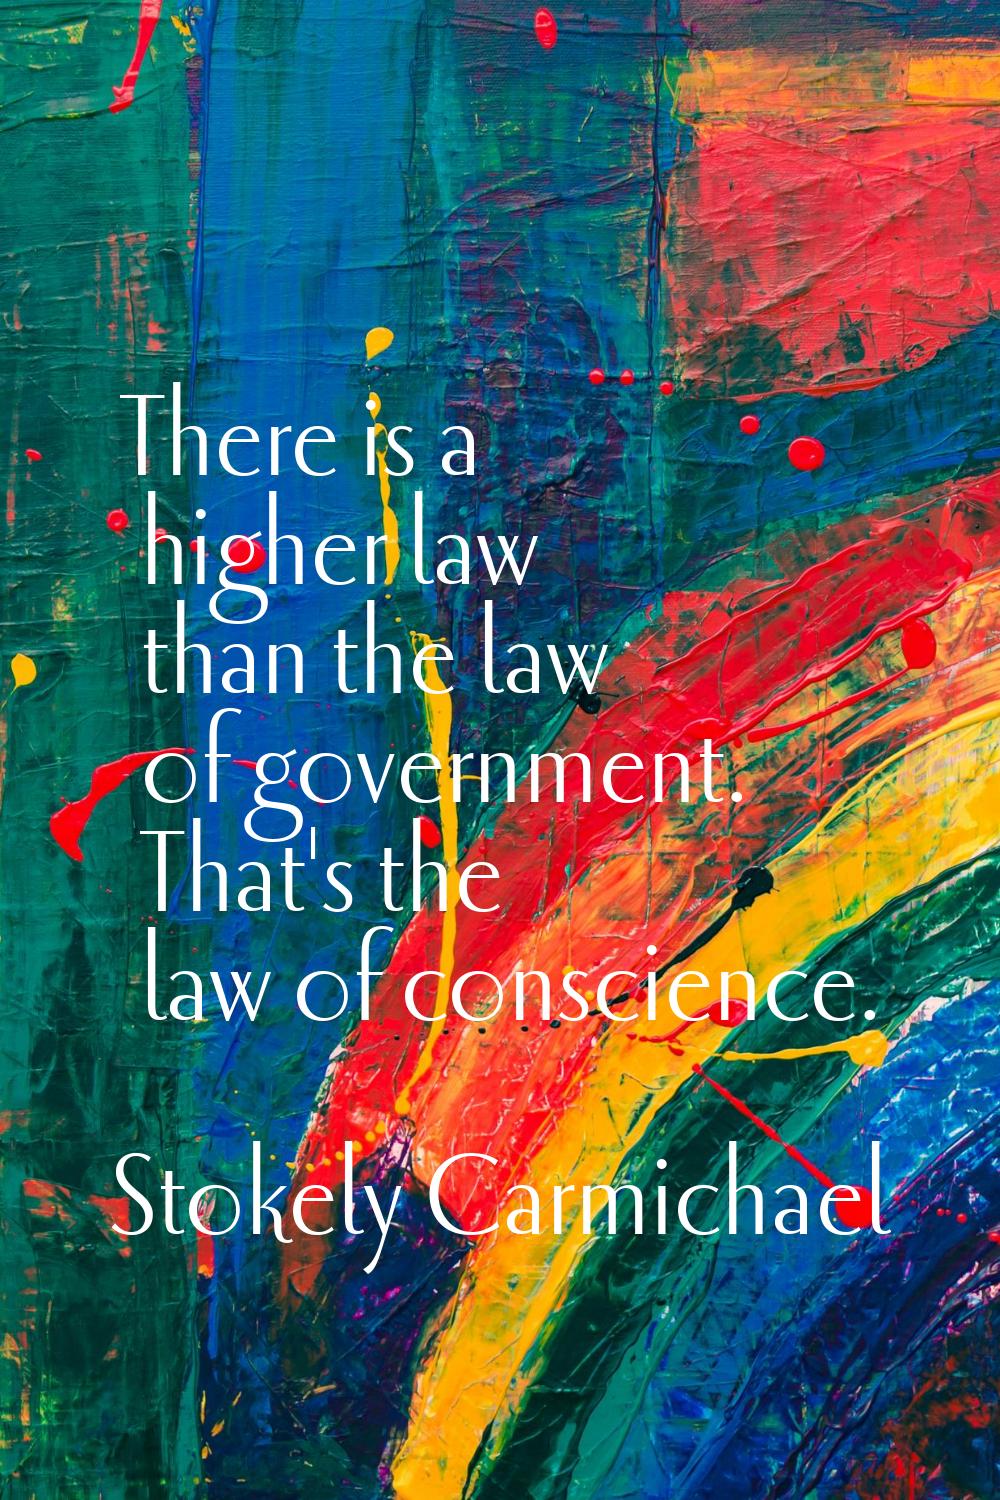 There is a higher law than the law of government. That's the law of conscience.